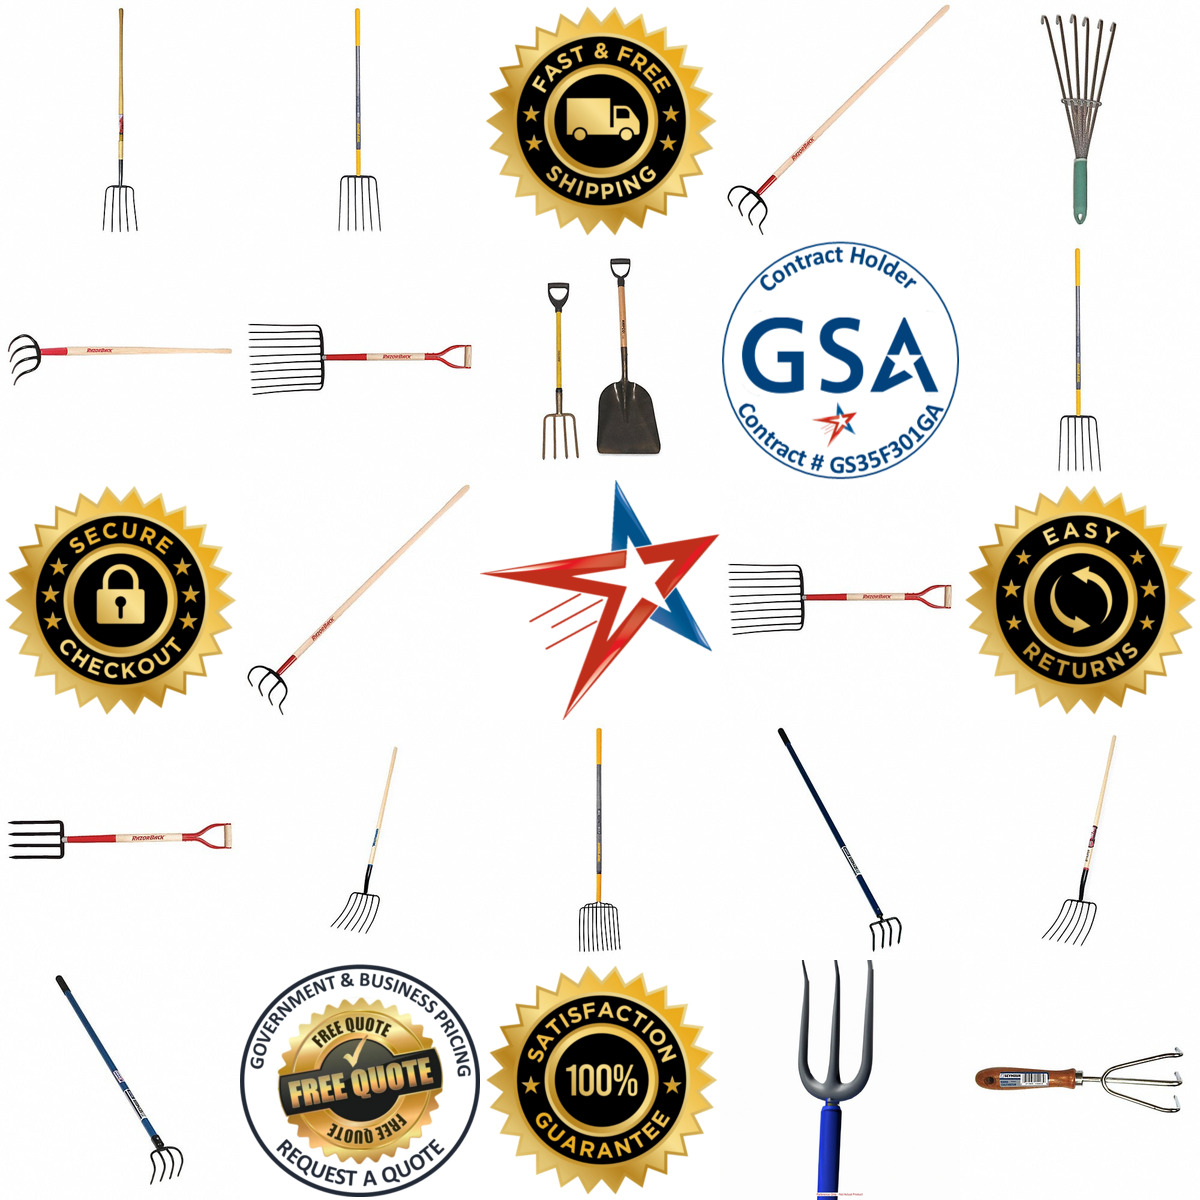 A selection of Agricultural and Garden Forks products on GoVets